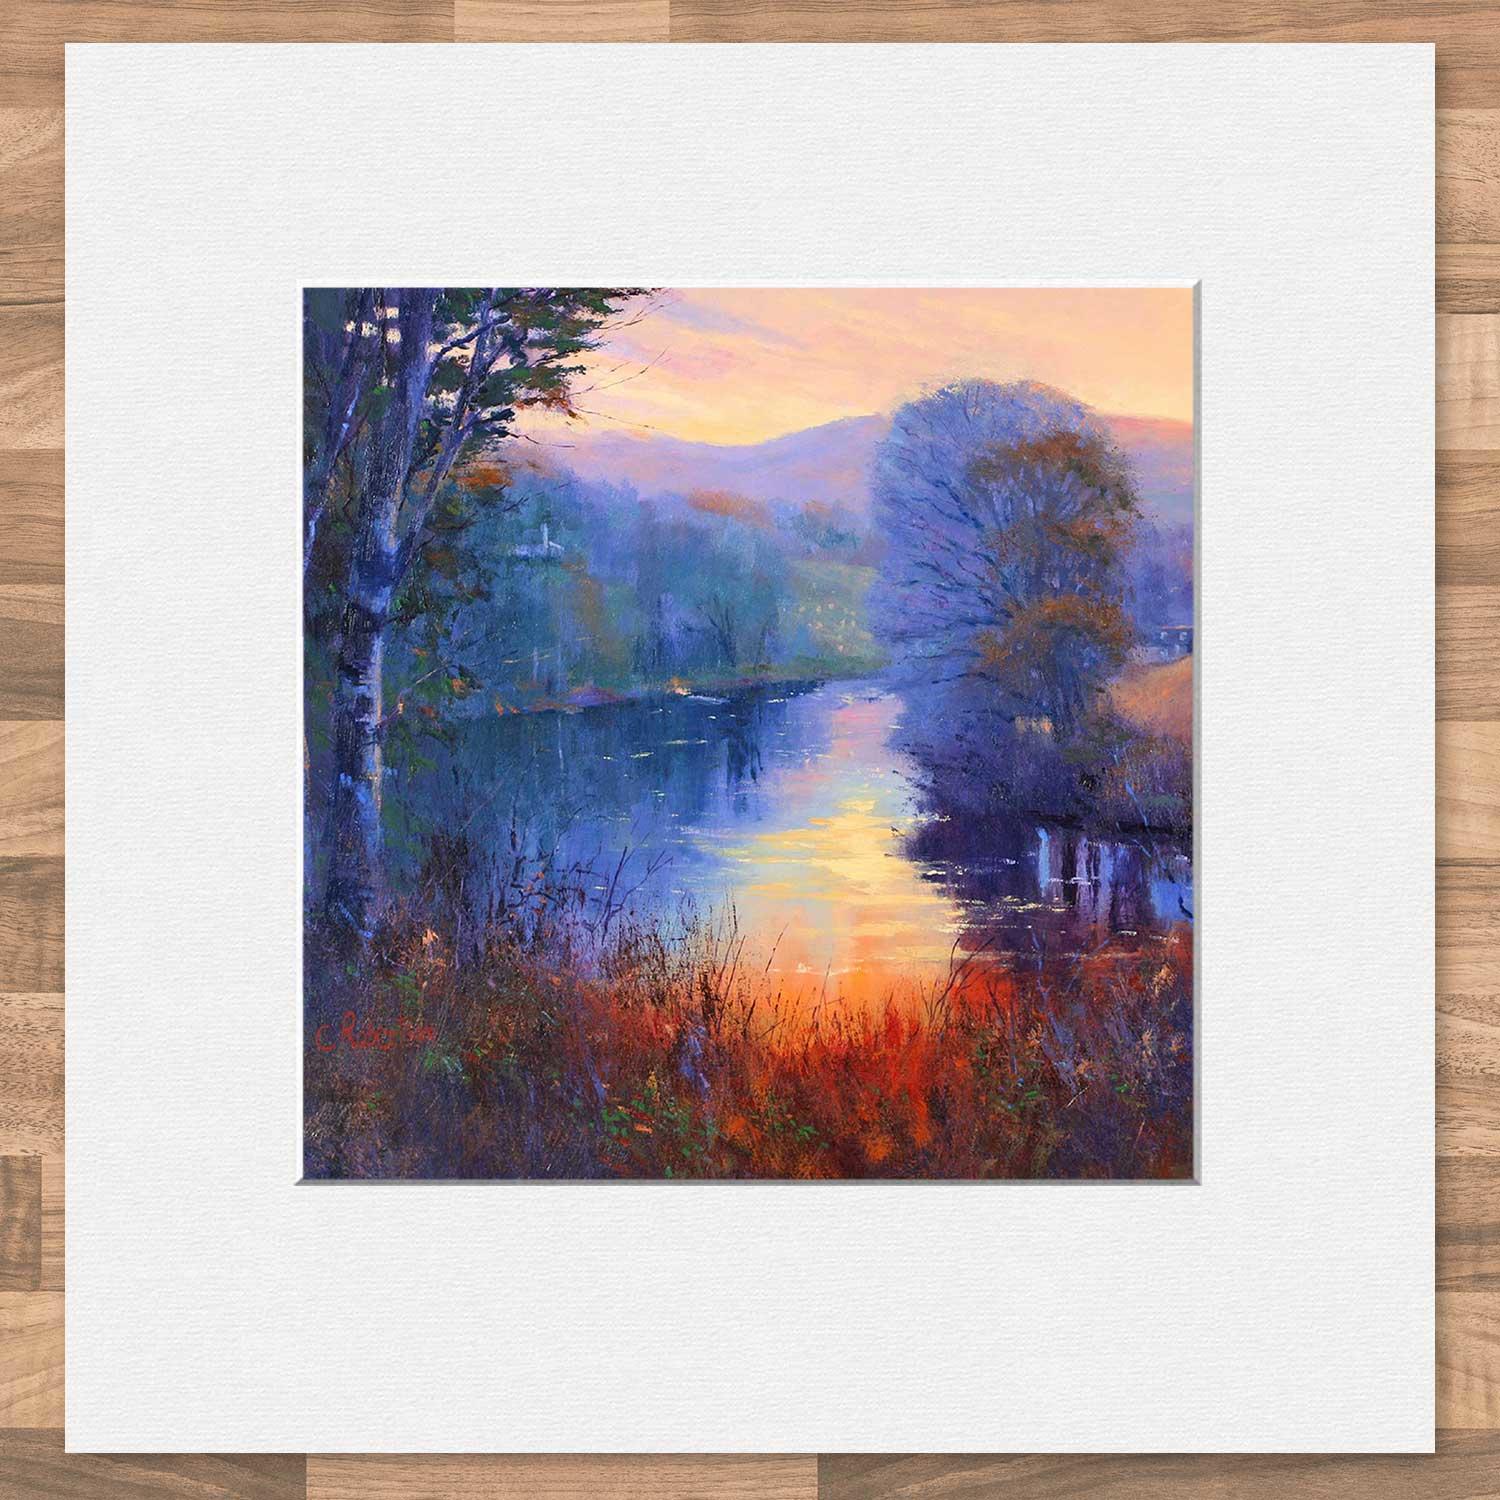 Evening Reflections Mounted Card from an original painting by artist Colin Robertson